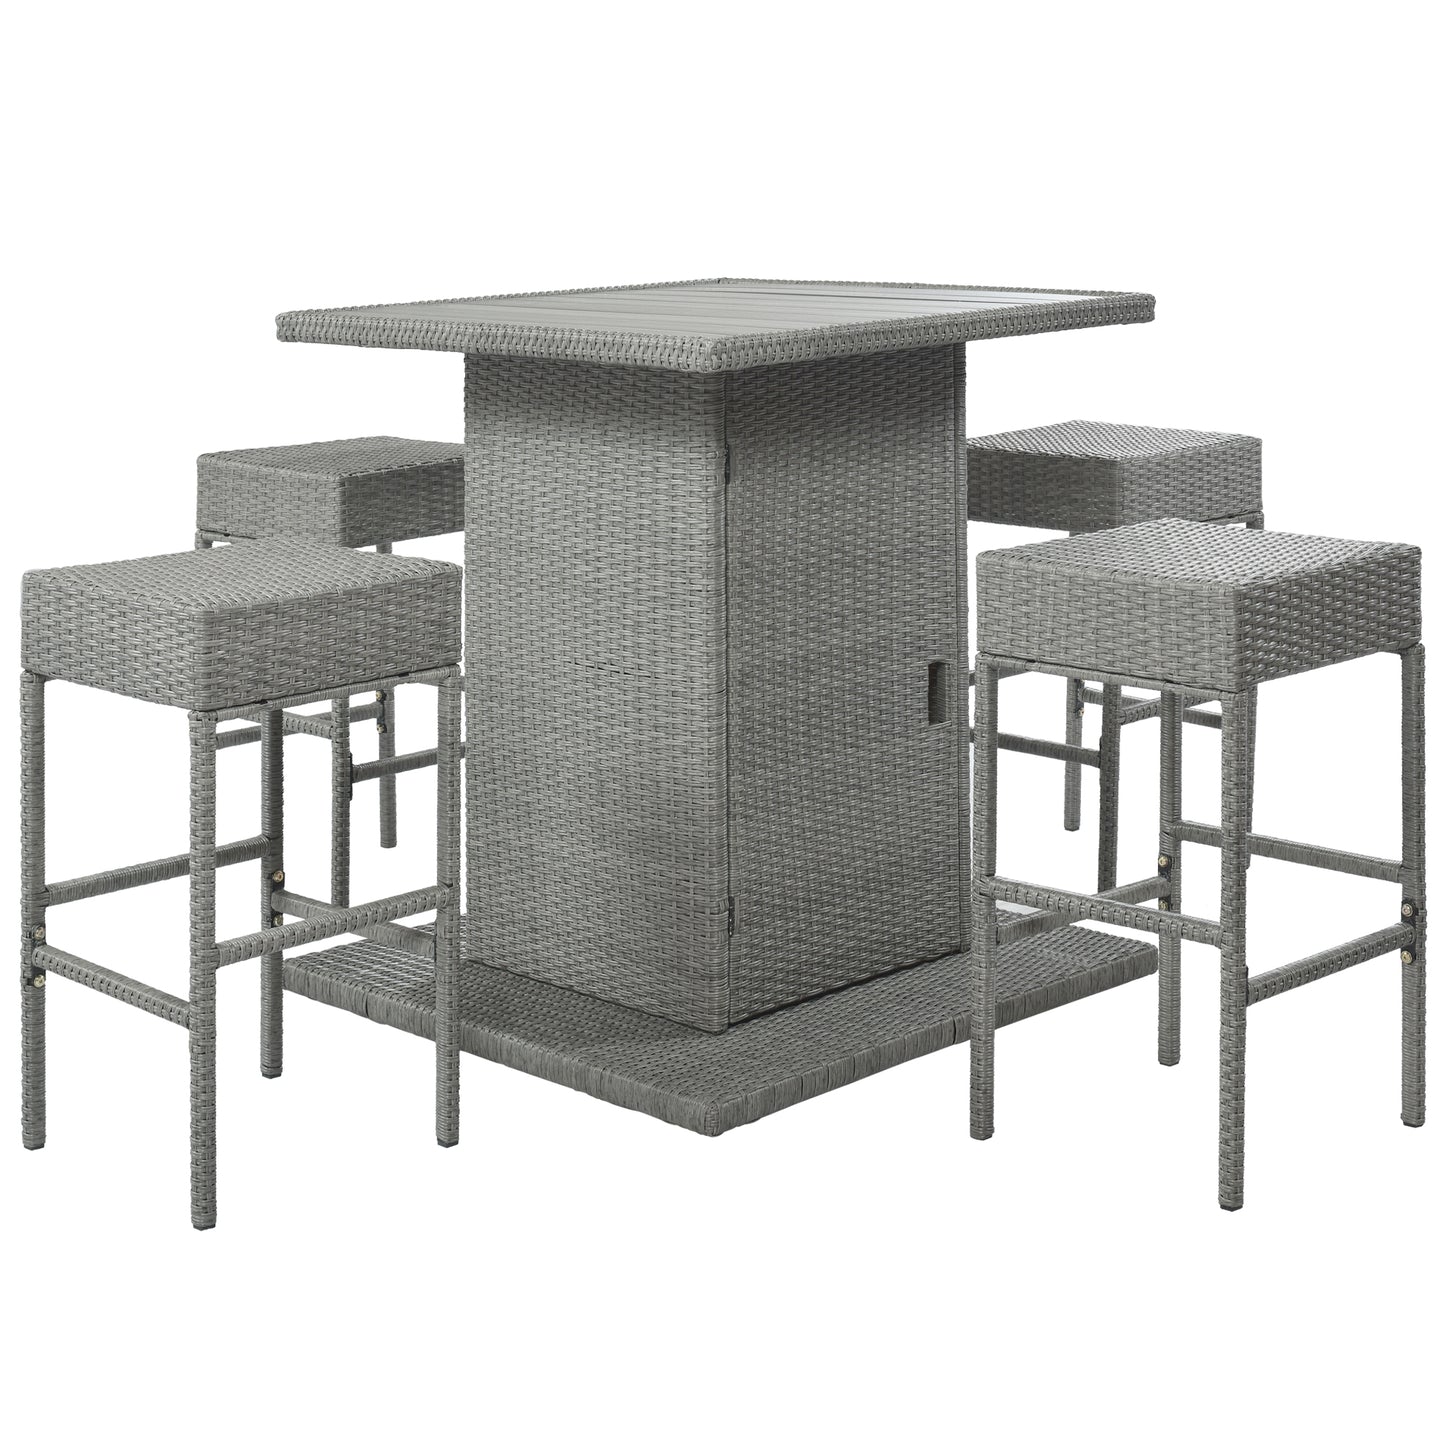 SYNGAR 5 Piece Outdoor Wicker Bar Table Set, Patio All Weather PE Rattan Dining Table Set with 4 Cushioned Stools, Bar Height Pub Table of Storage & Stools Set for 4, for Yard, Balcony, Garden, Y017